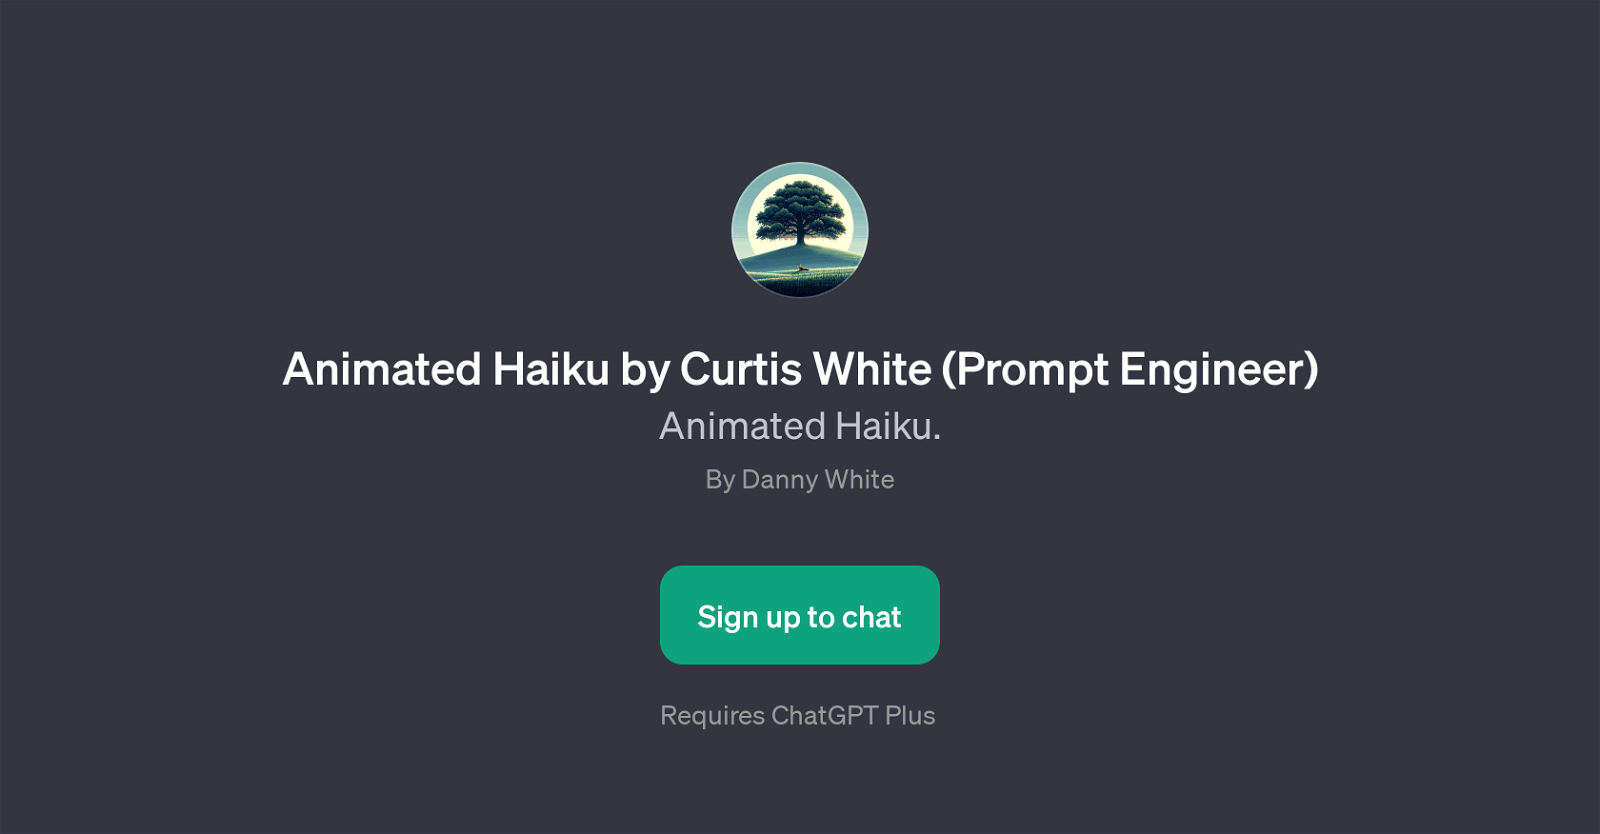 Animated Haiku by Curtis White (Prompt Engineer) website